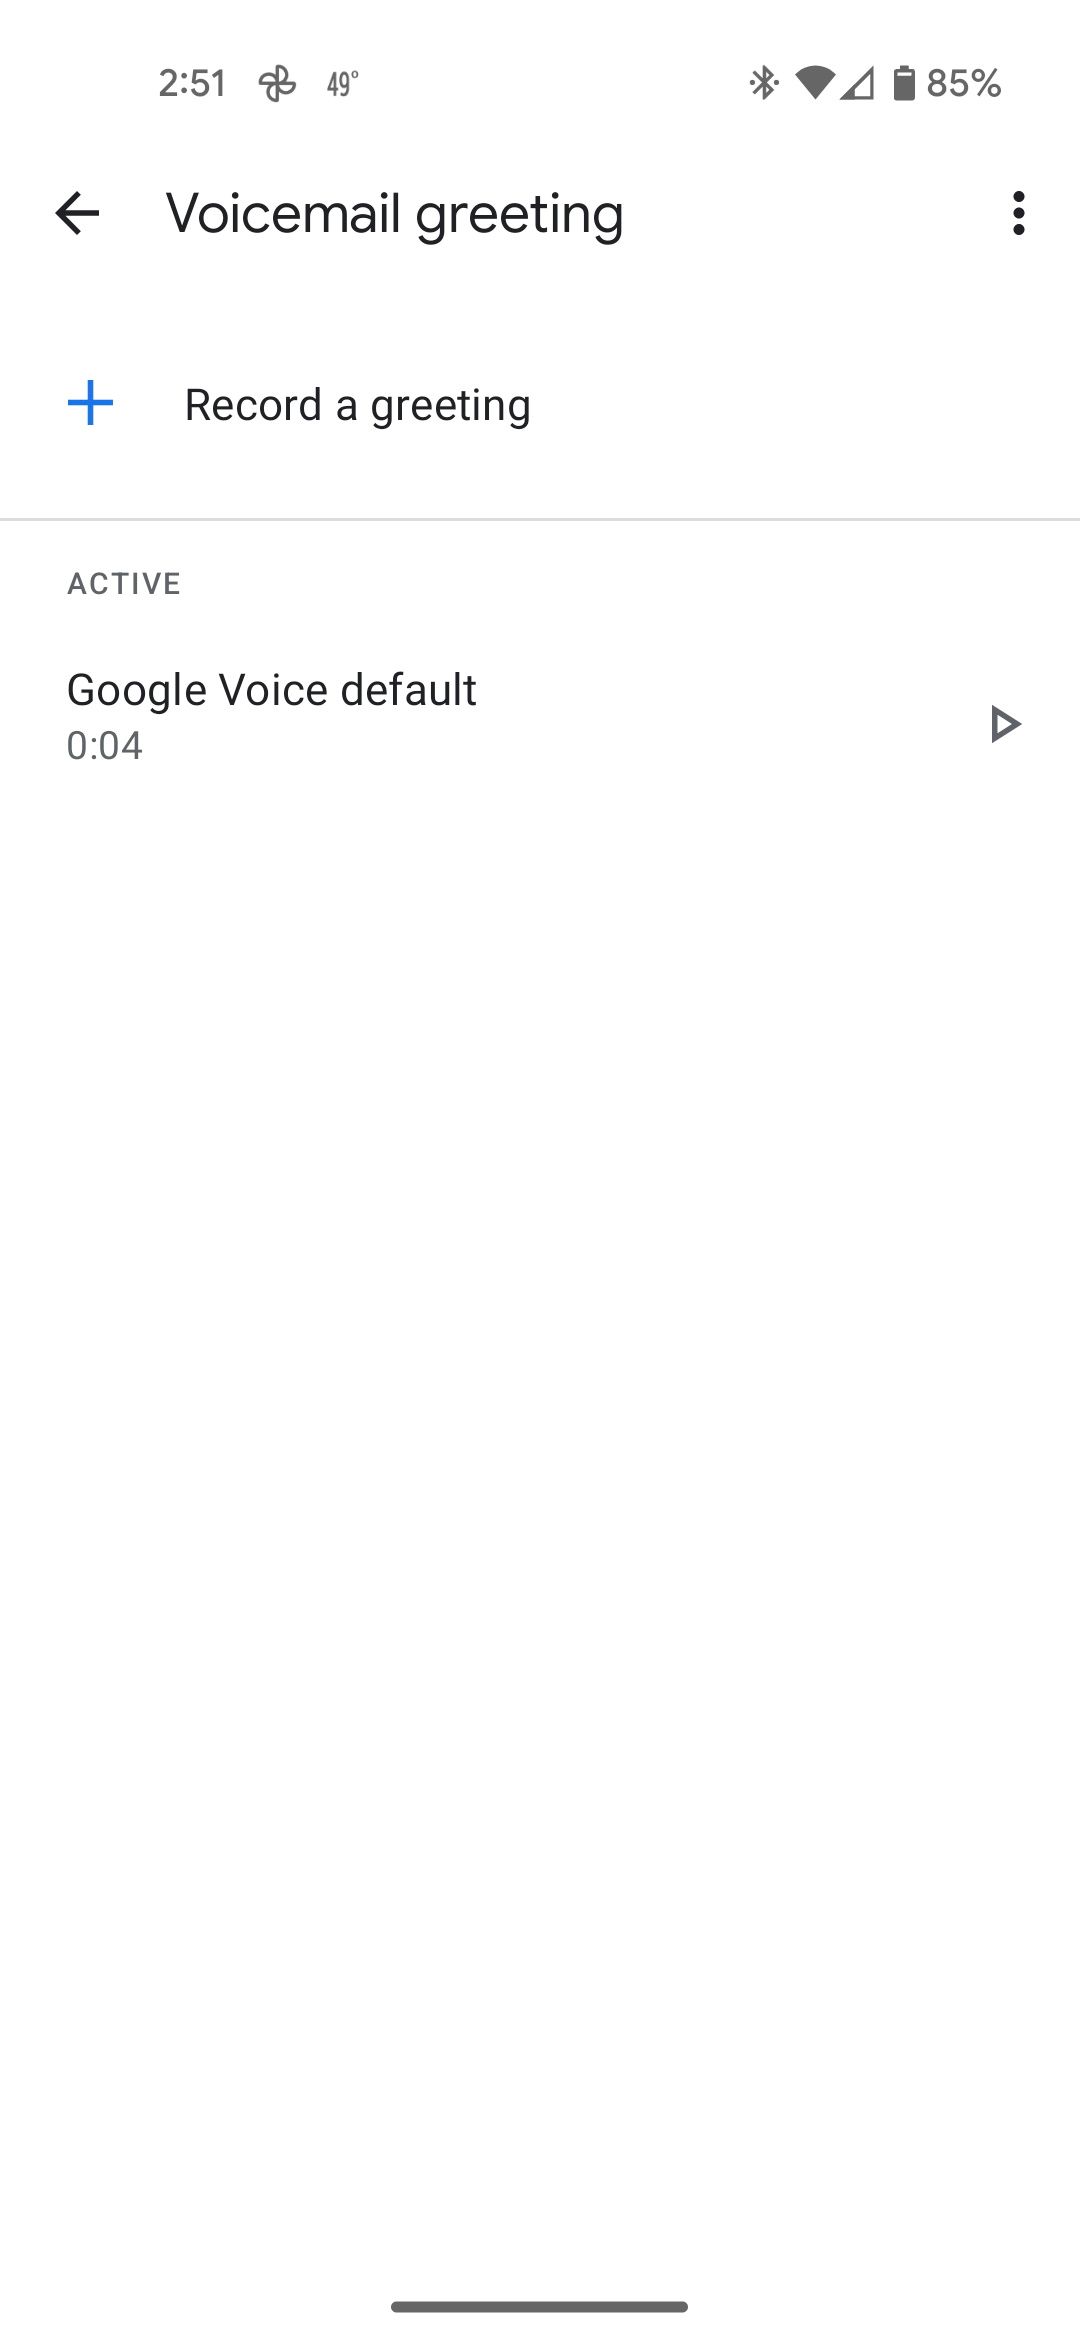 An example of a voicemail greeting in Google Voice